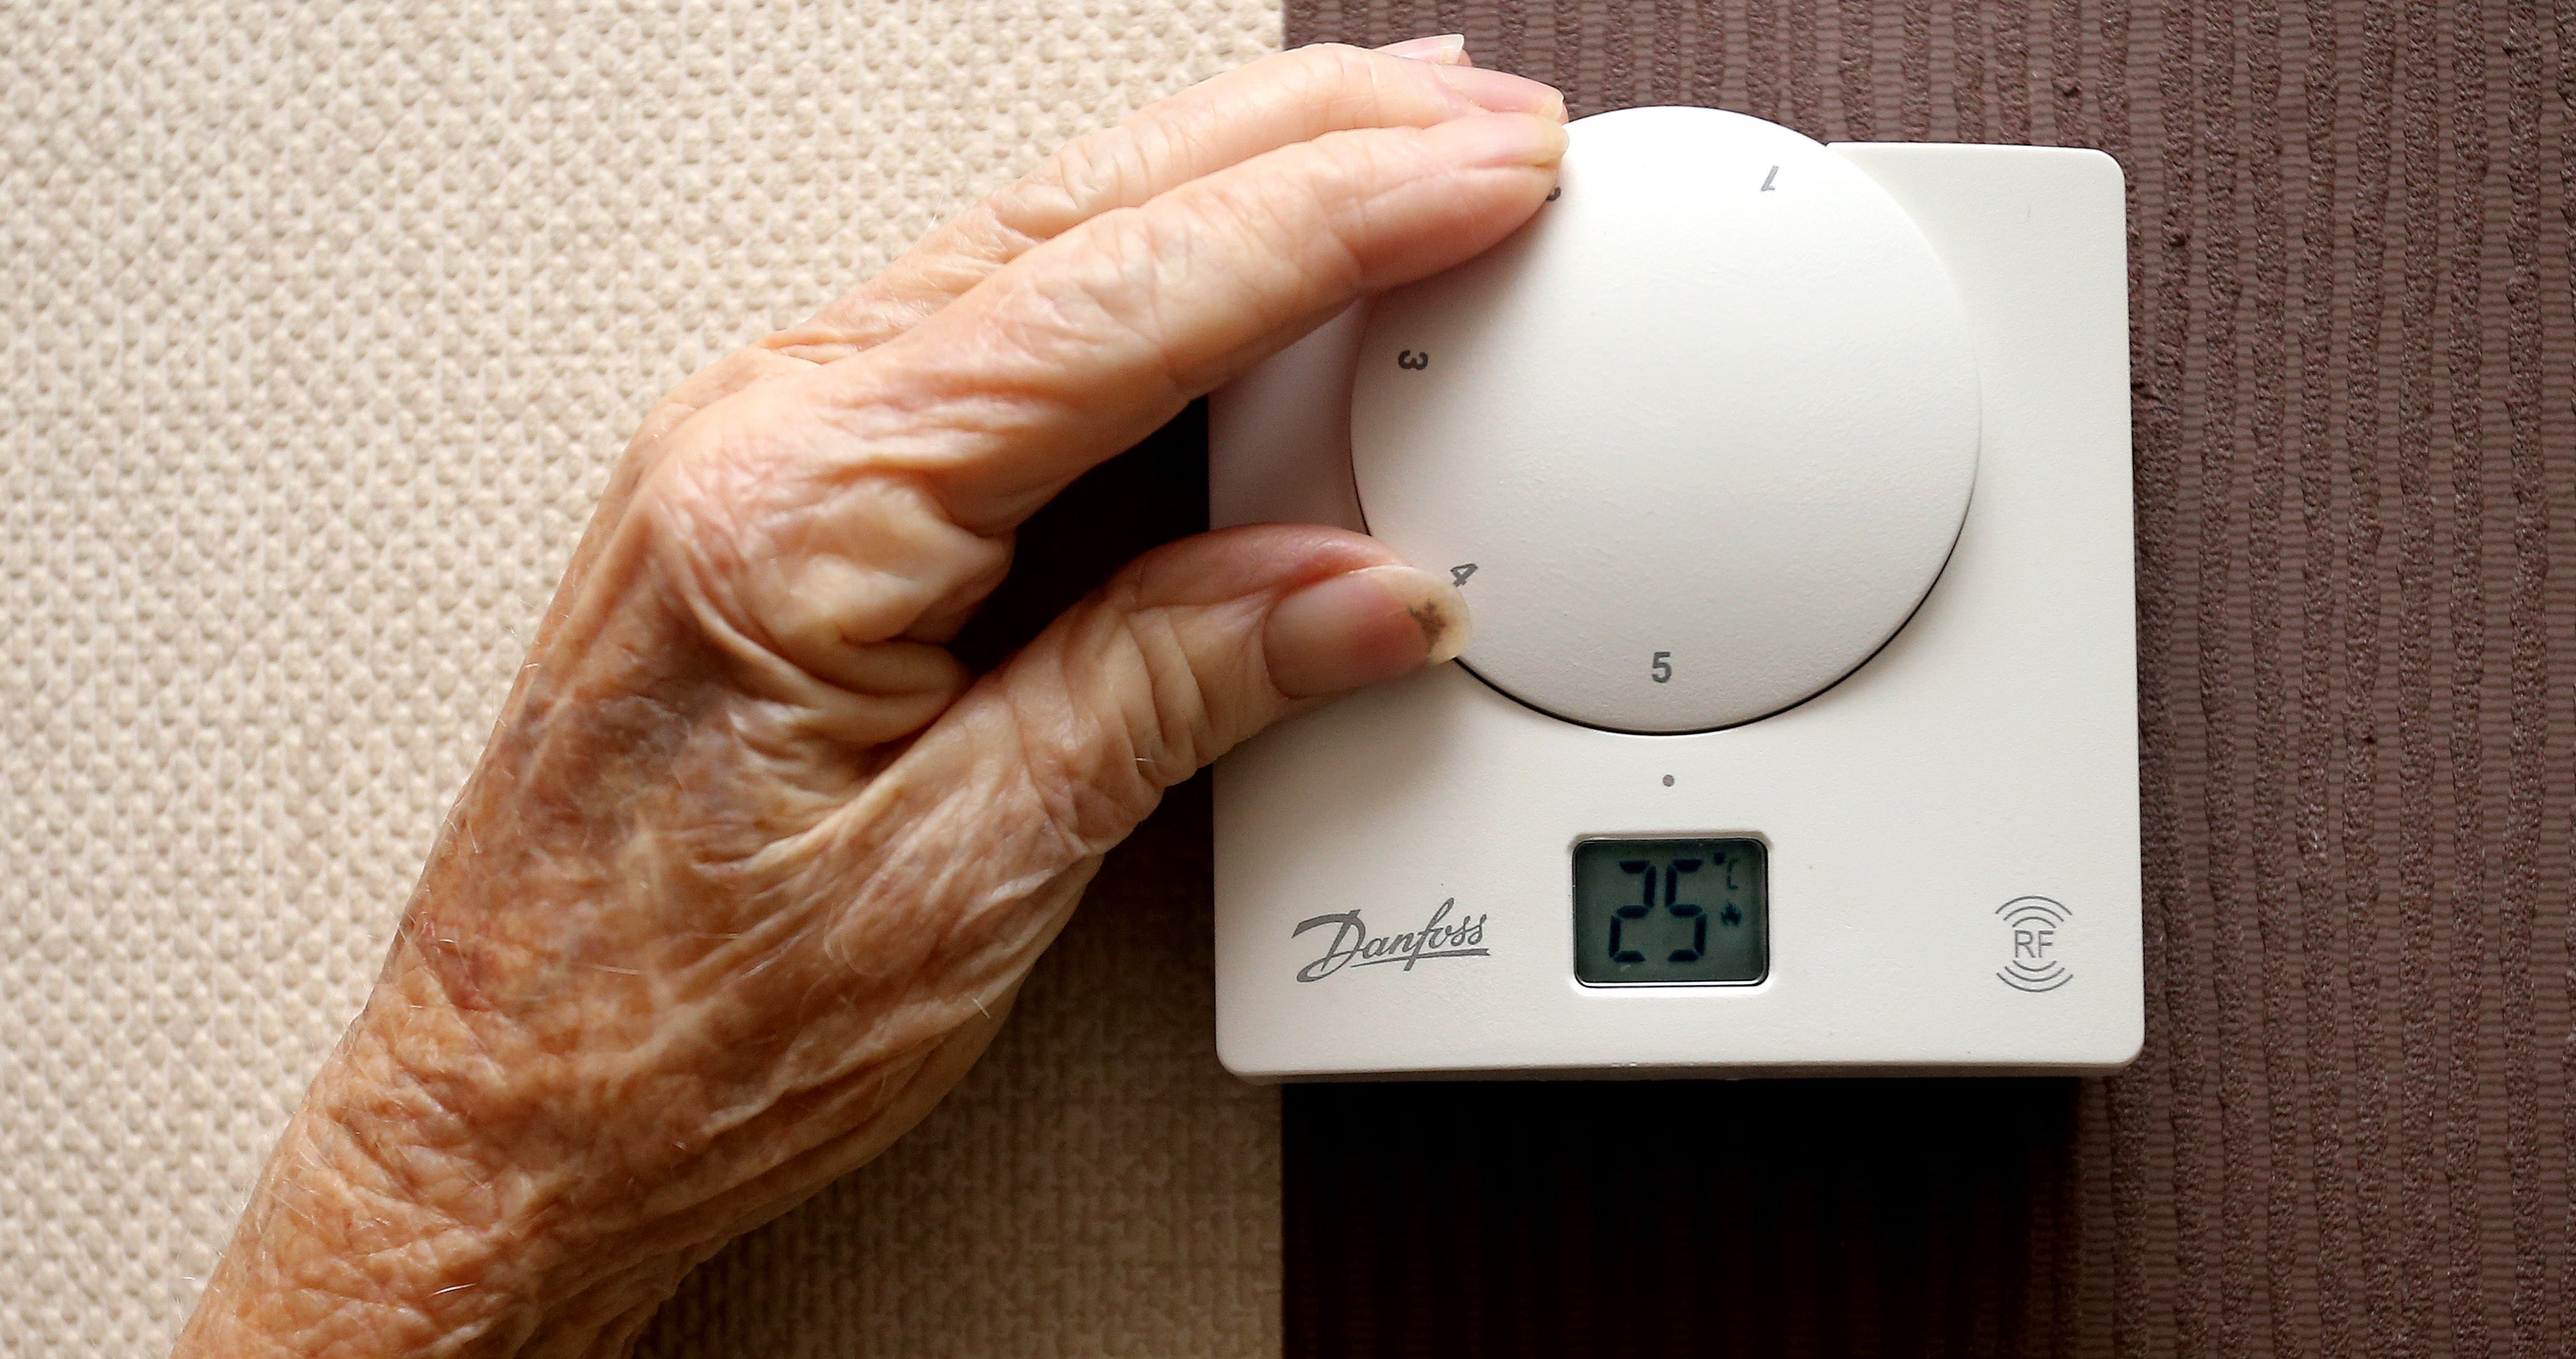 Some older people are already too scared to turn on their heating, Age UK said (PA)